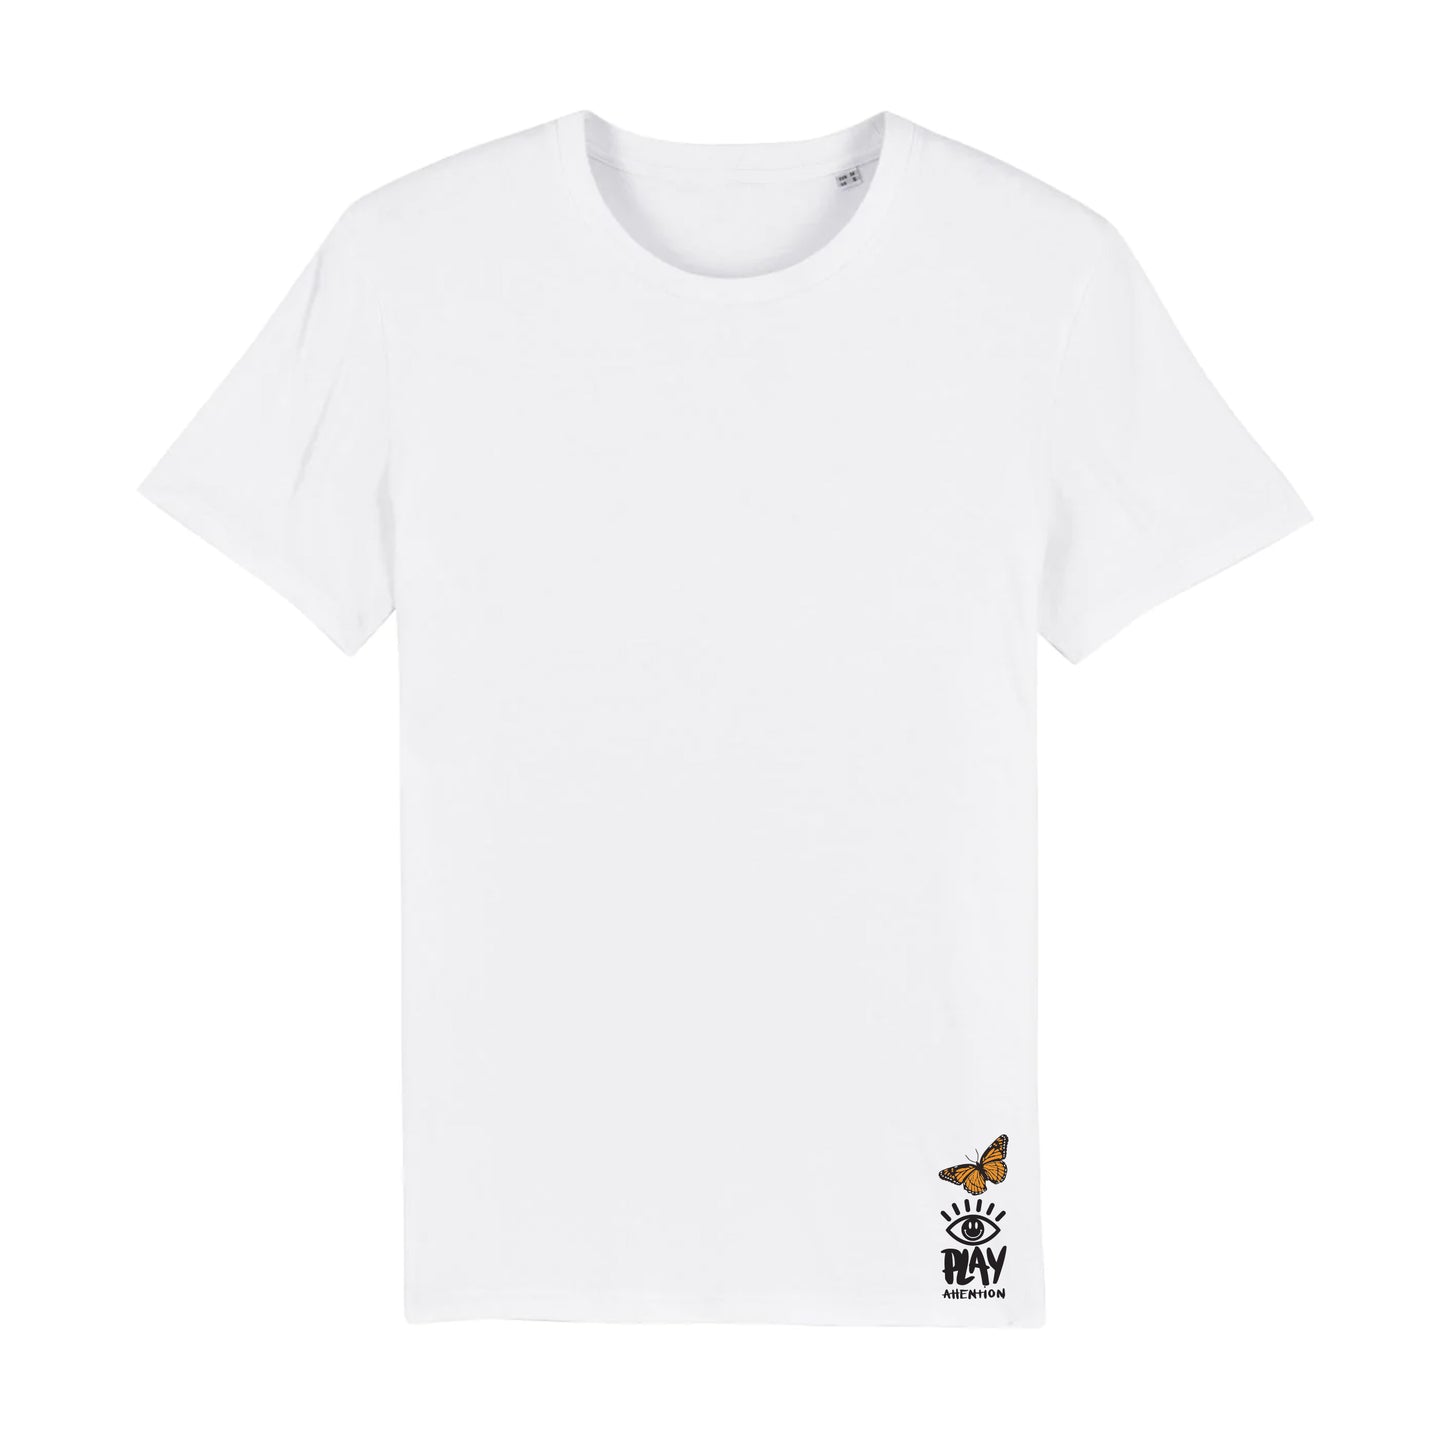 Secret Garden Party x Play Attention - The Drop Stage T-Shirt (White / Unisex Fit)